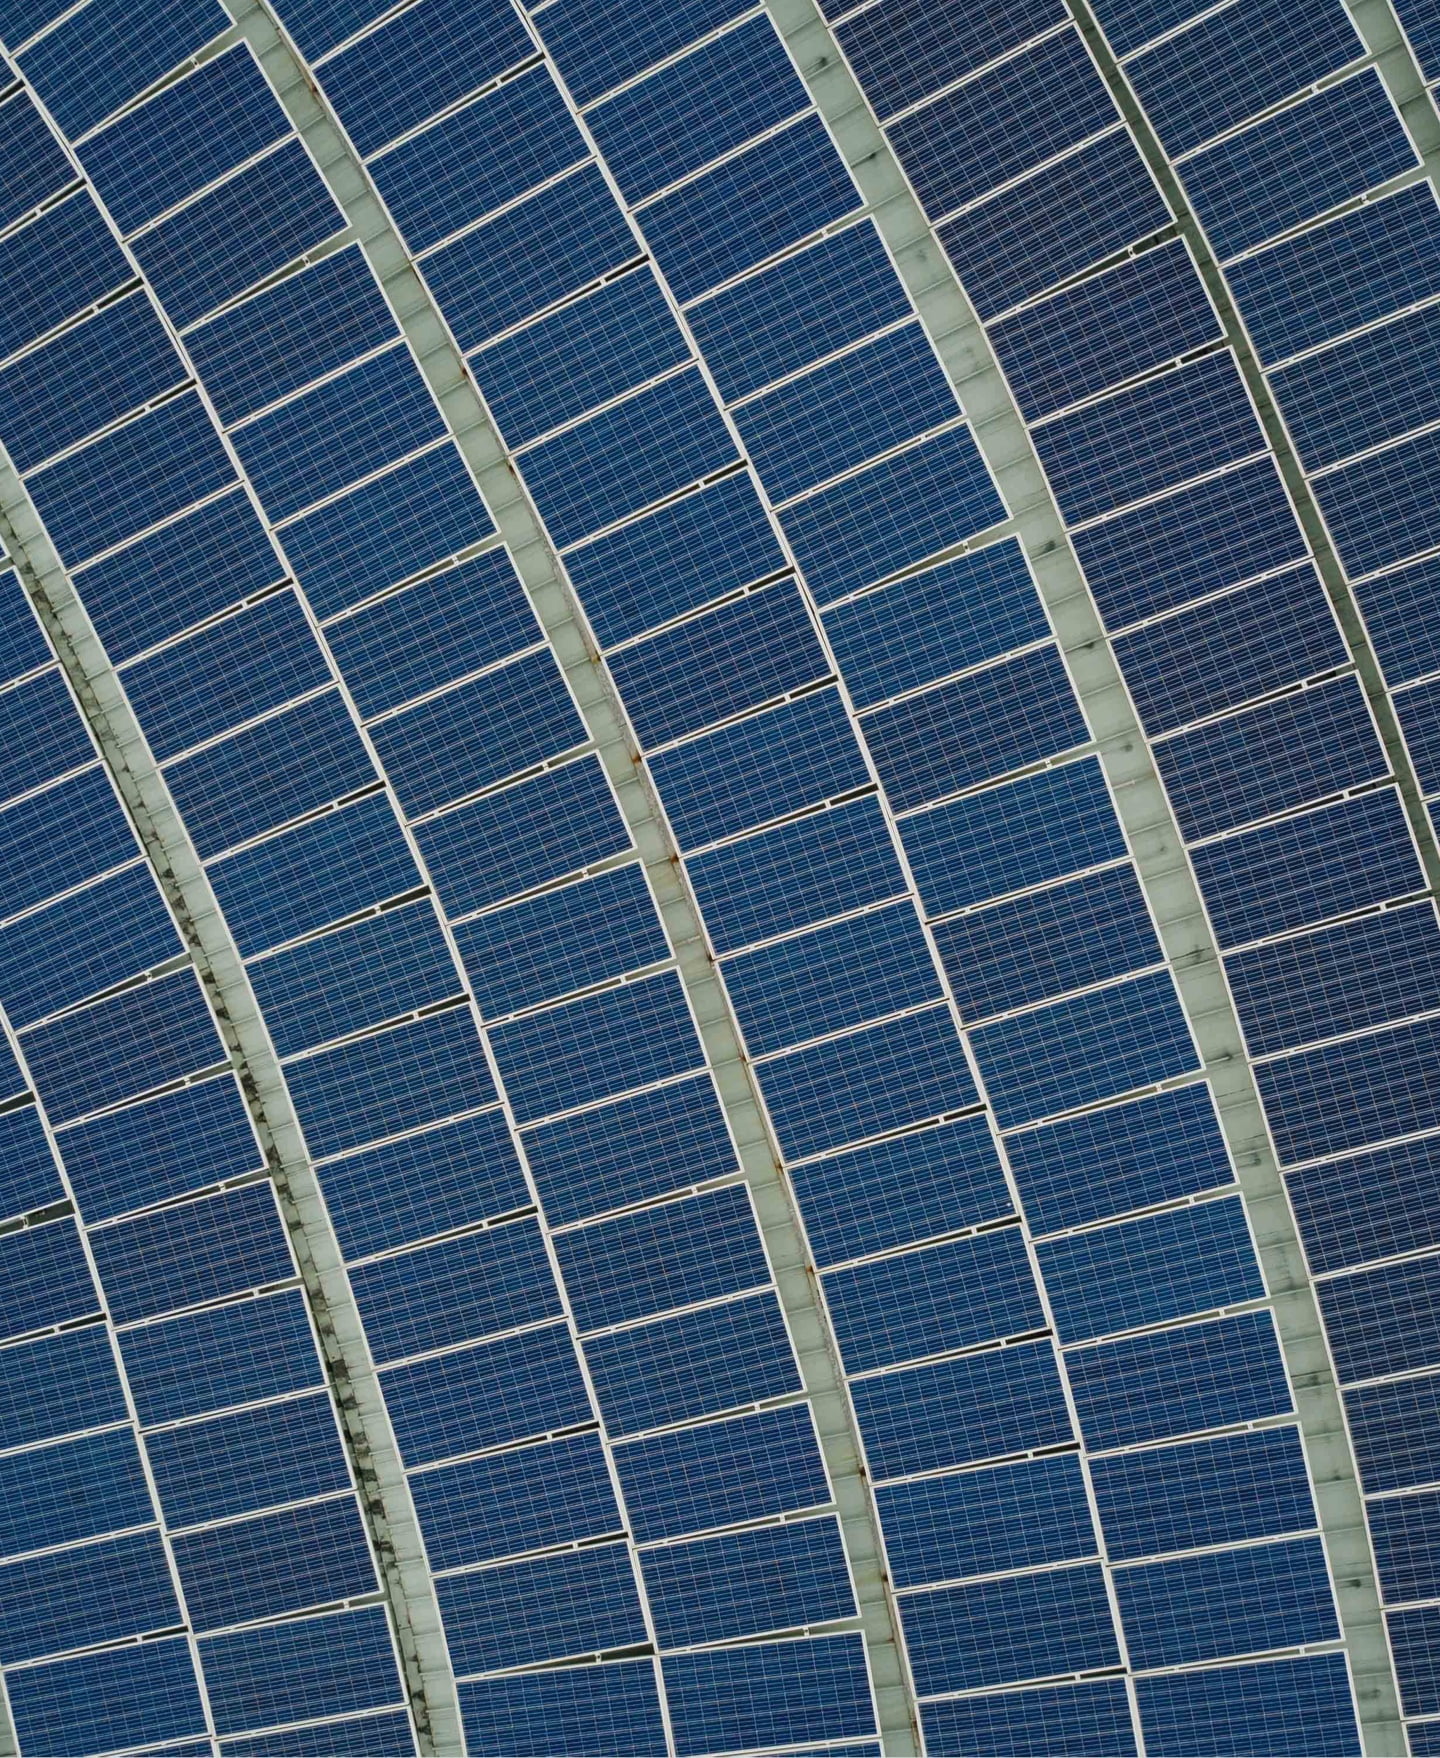 An array of blue solar panels arranged in a curved pattern